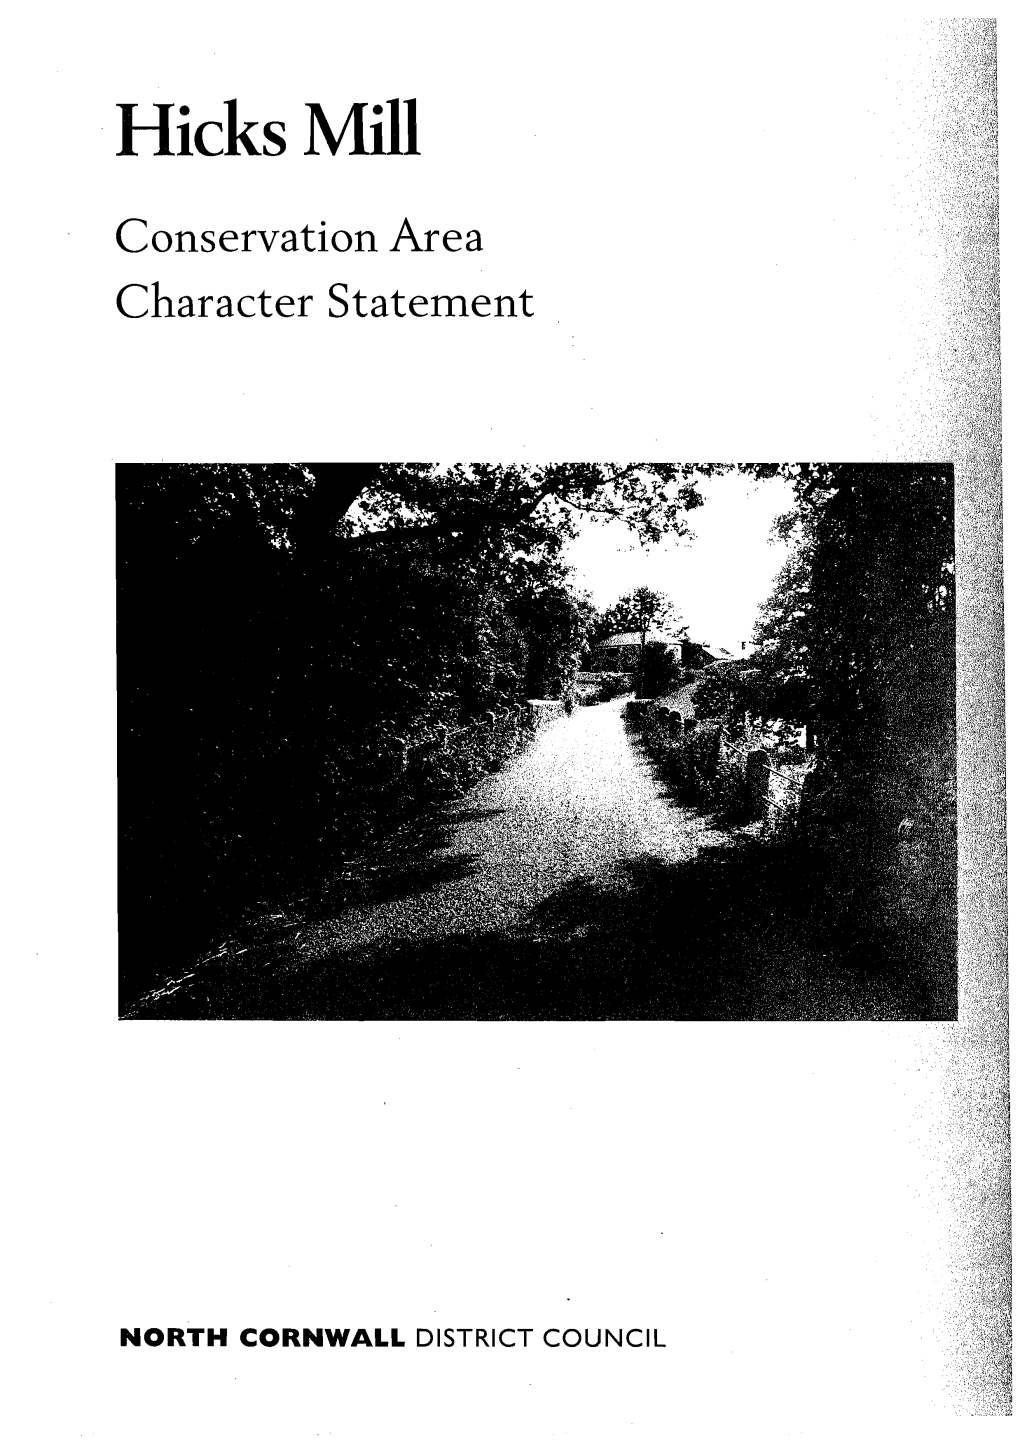 Hicks Mill Conservation Area Character Statement